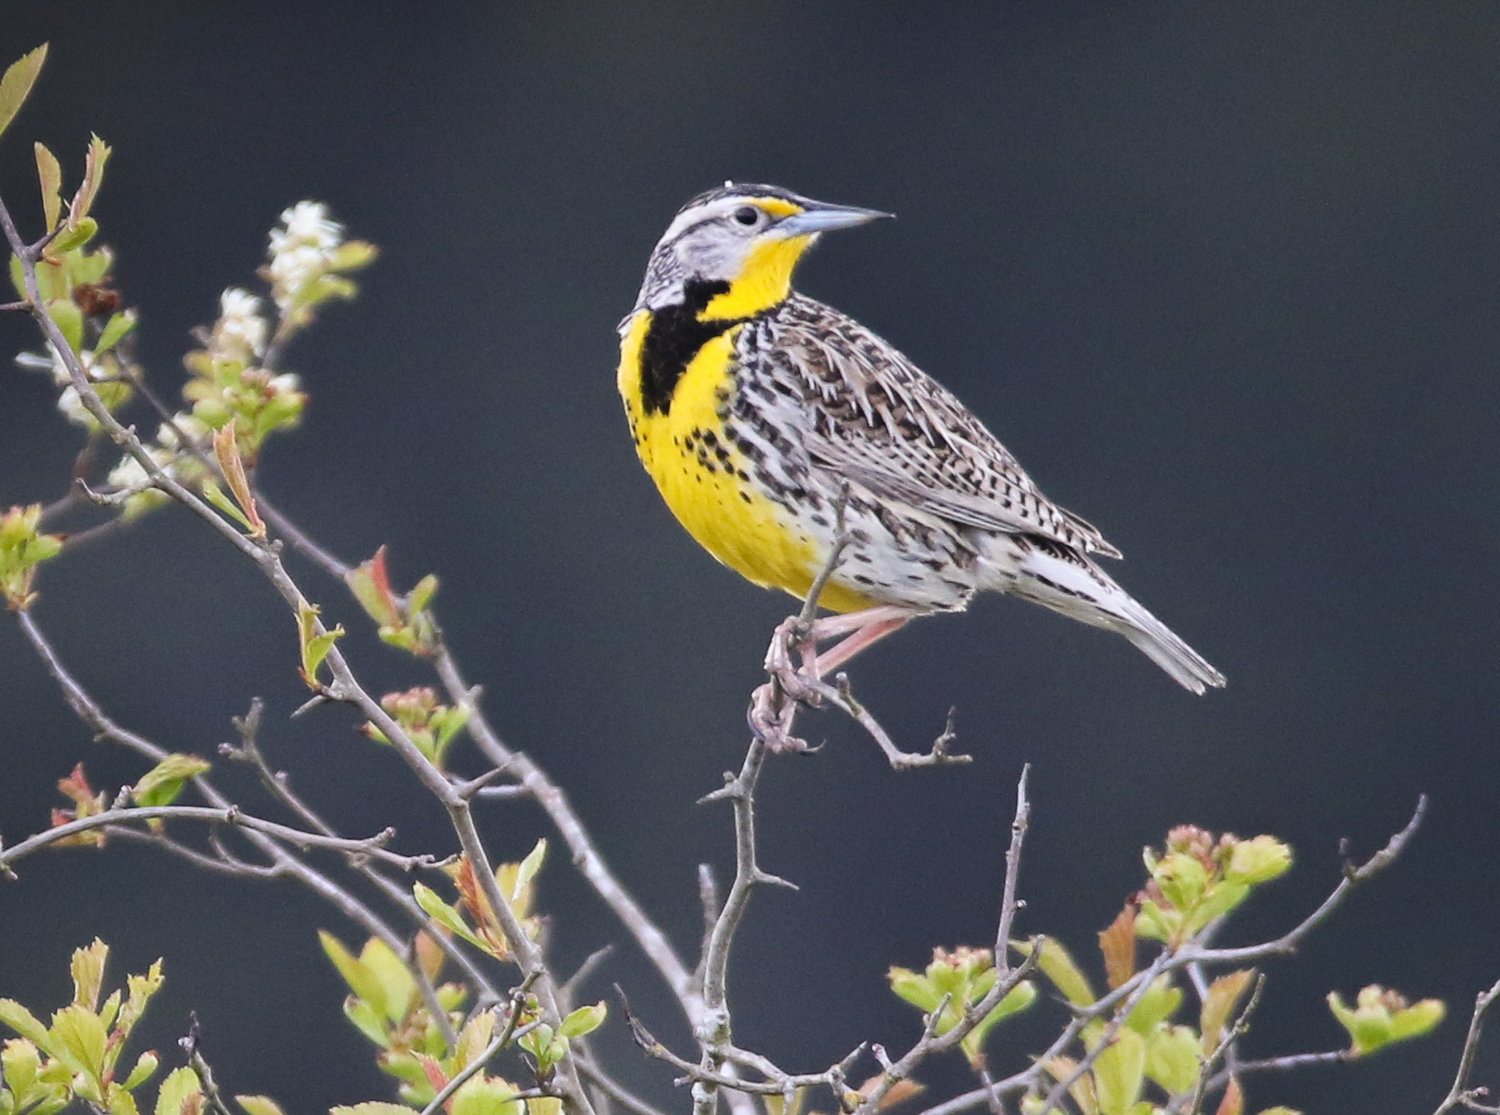 This is the Western Meadowlark.